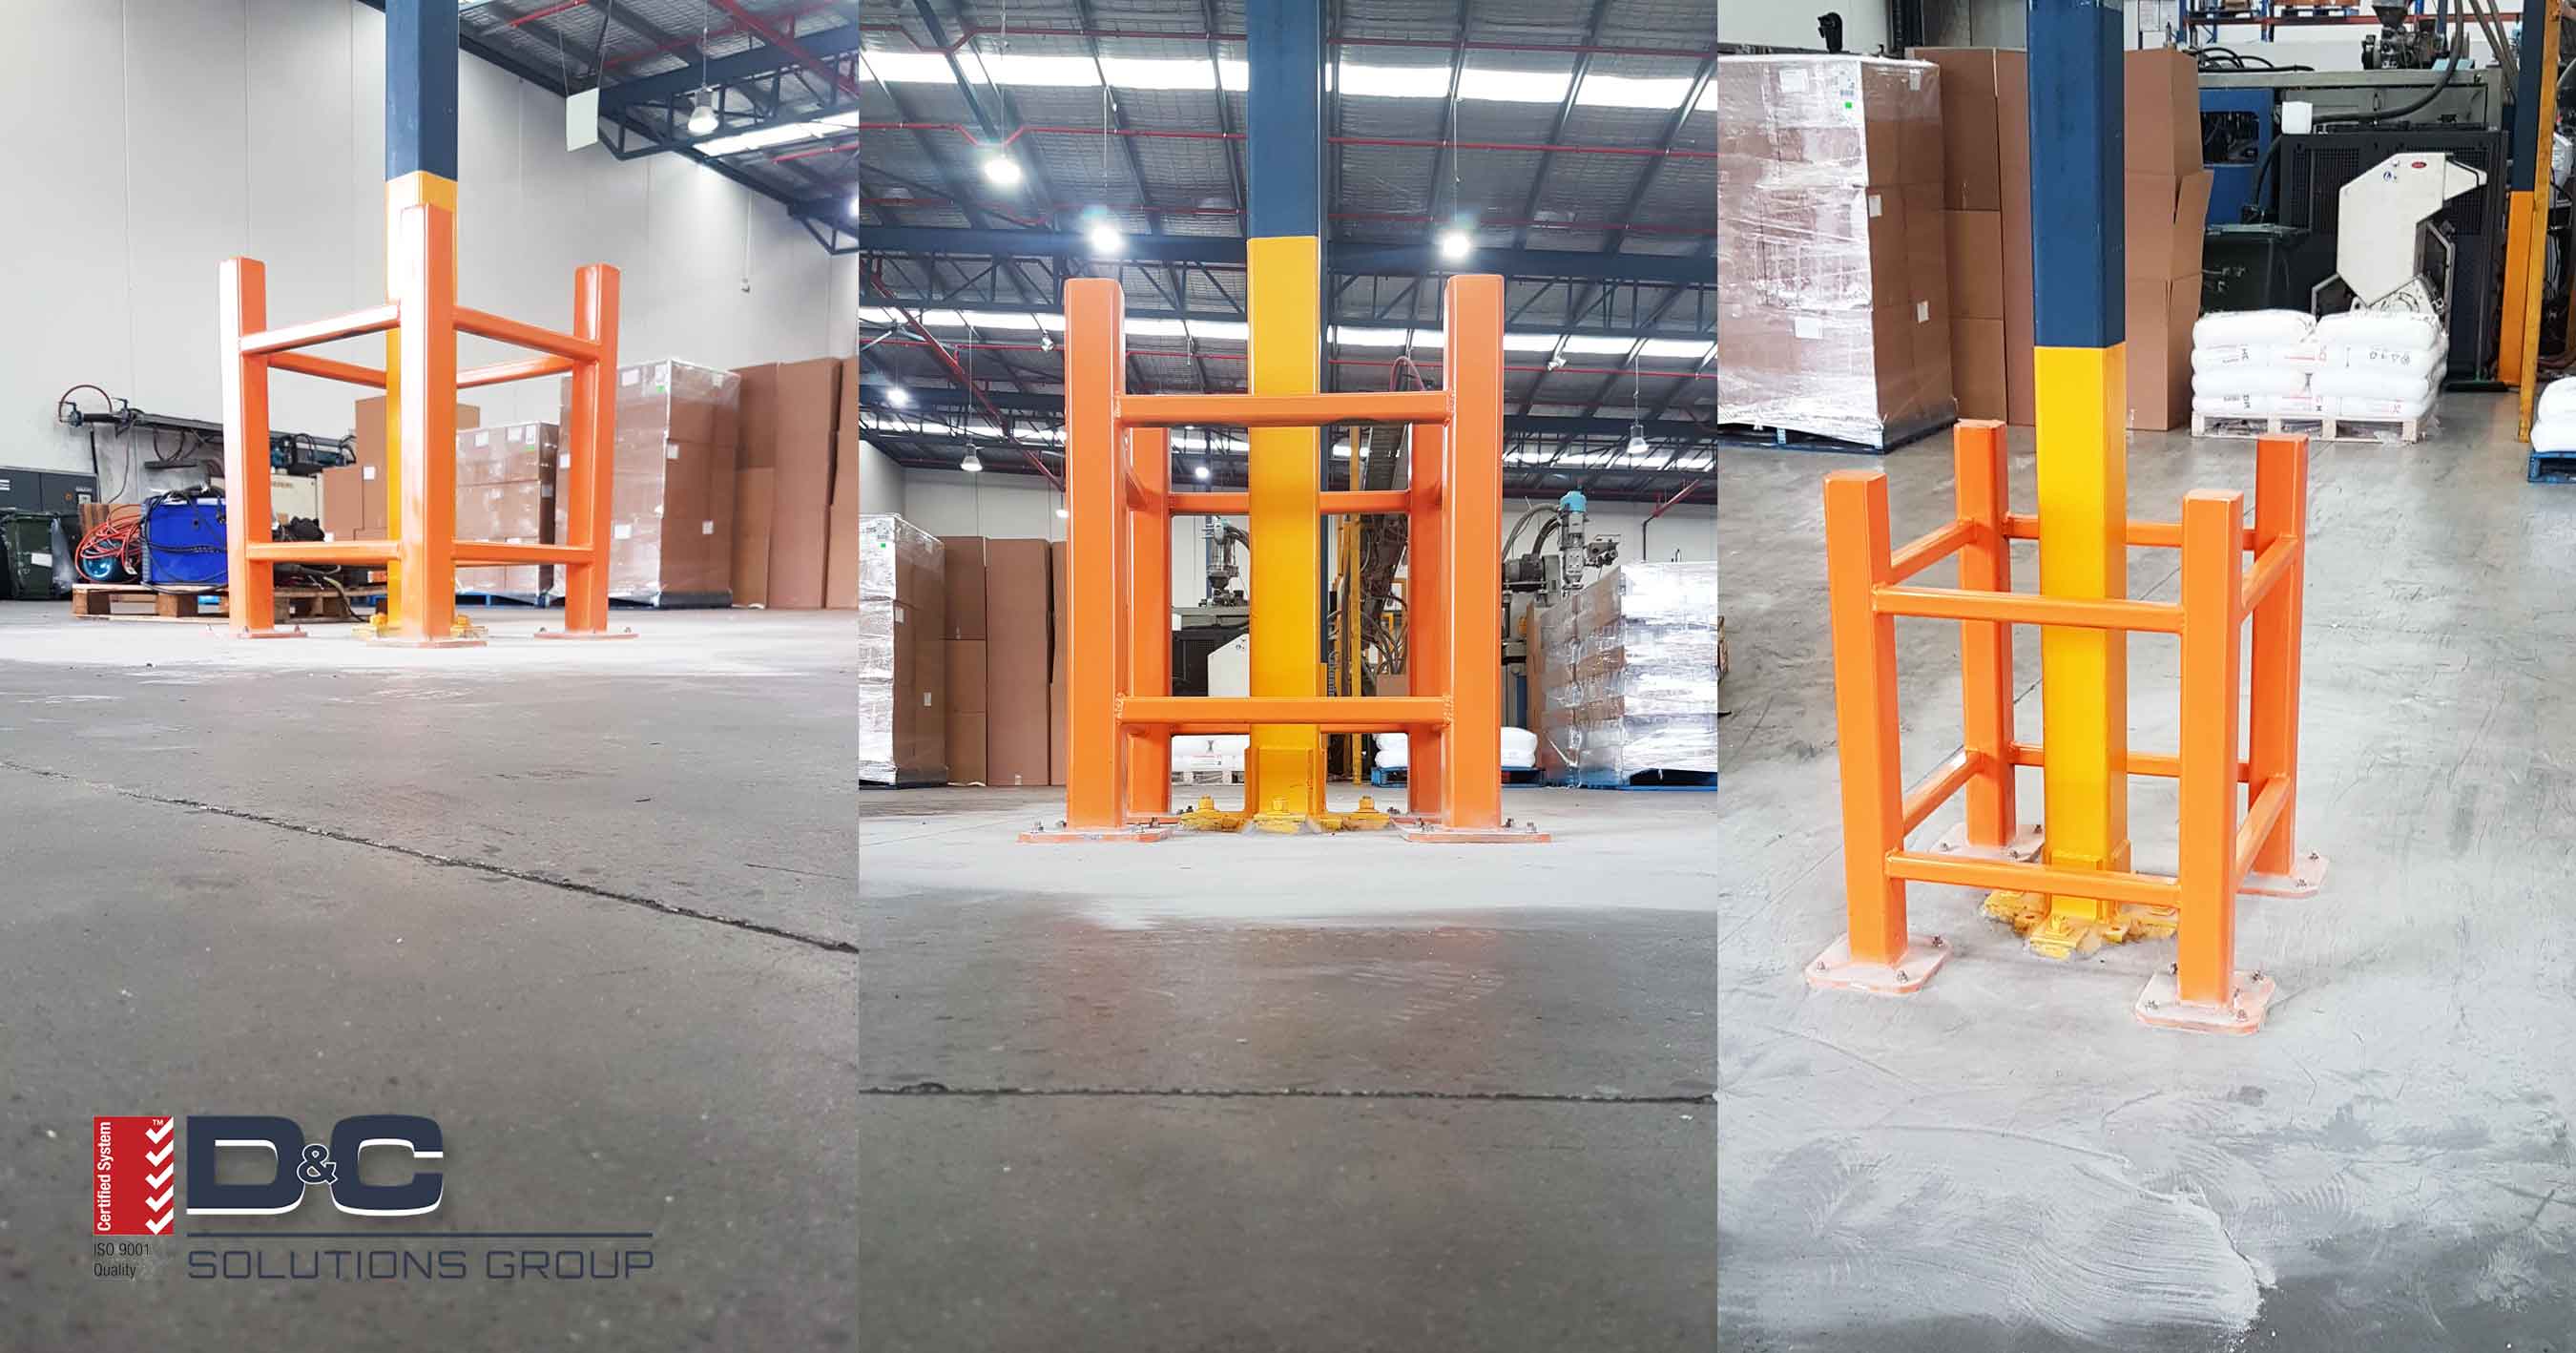 Custom Fabricated Bollards and Safety Barriers in Warehouse